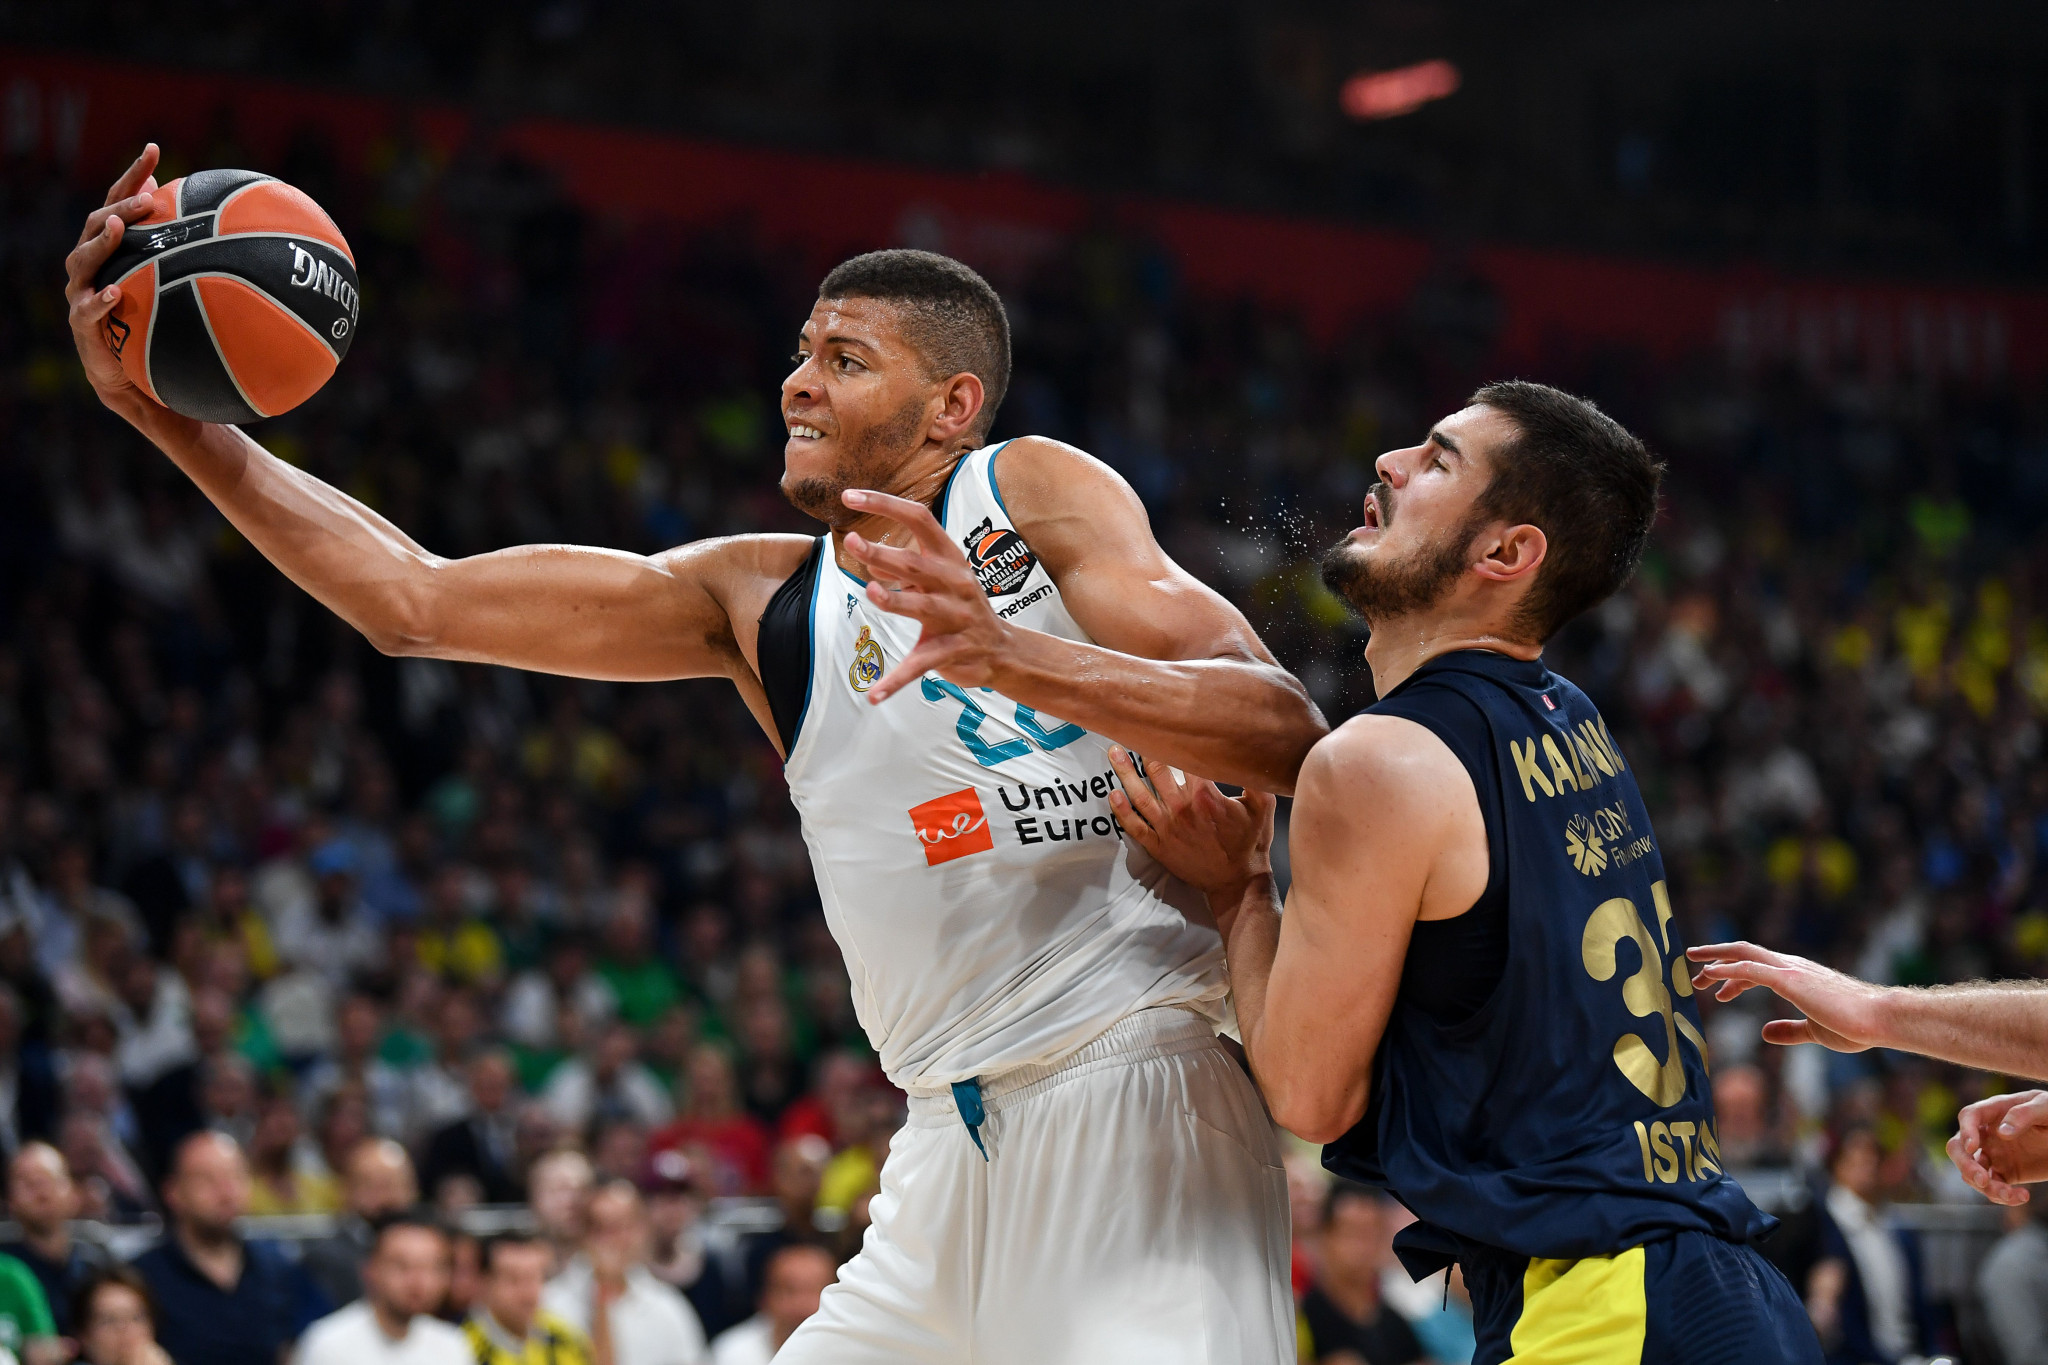 EuroLeague have been locked in a dispute with FIBA over the release of players for qualifiers ©Getty Images